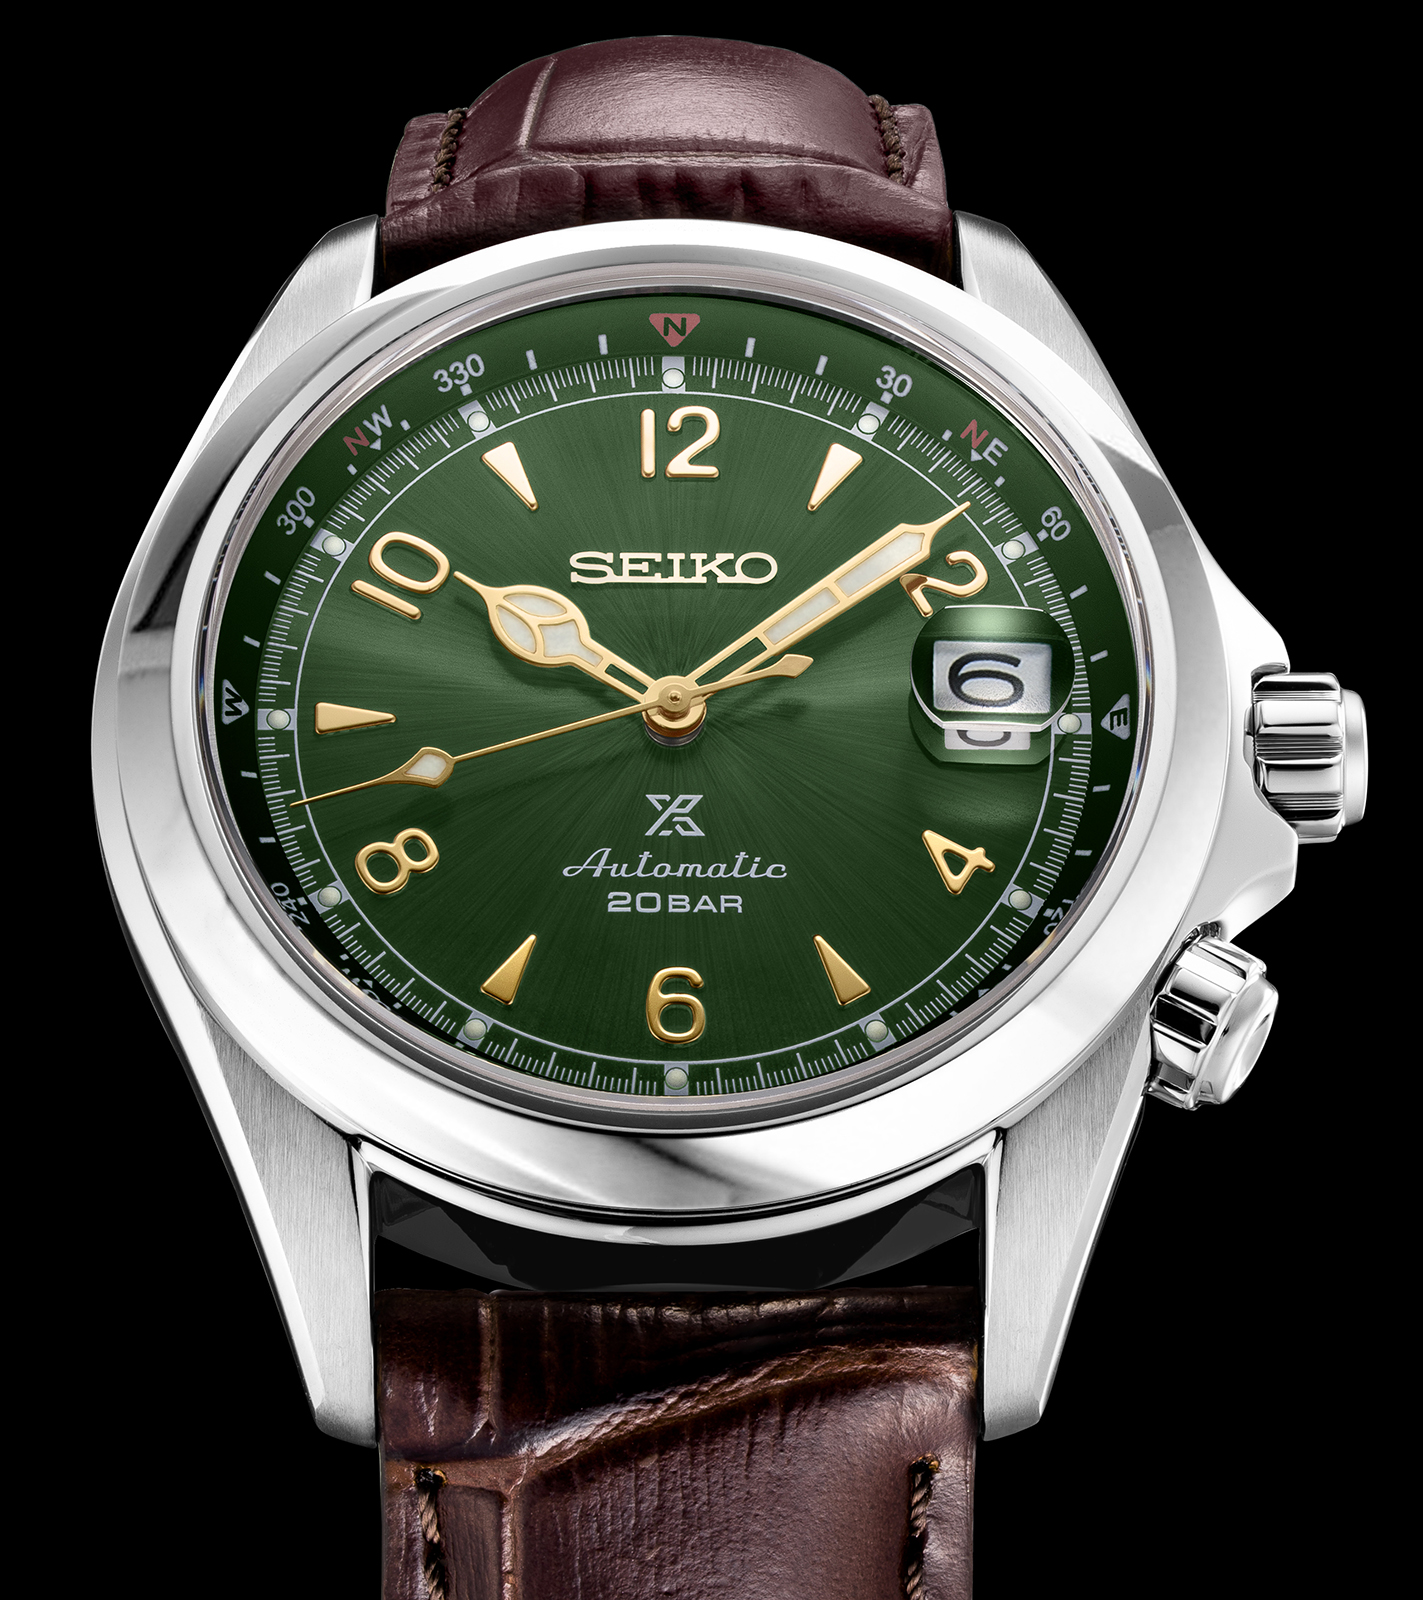 Seiko Adds Four New Alpinist-Inspired Watches To Prospex Line For 2020 aBlogtoWatch